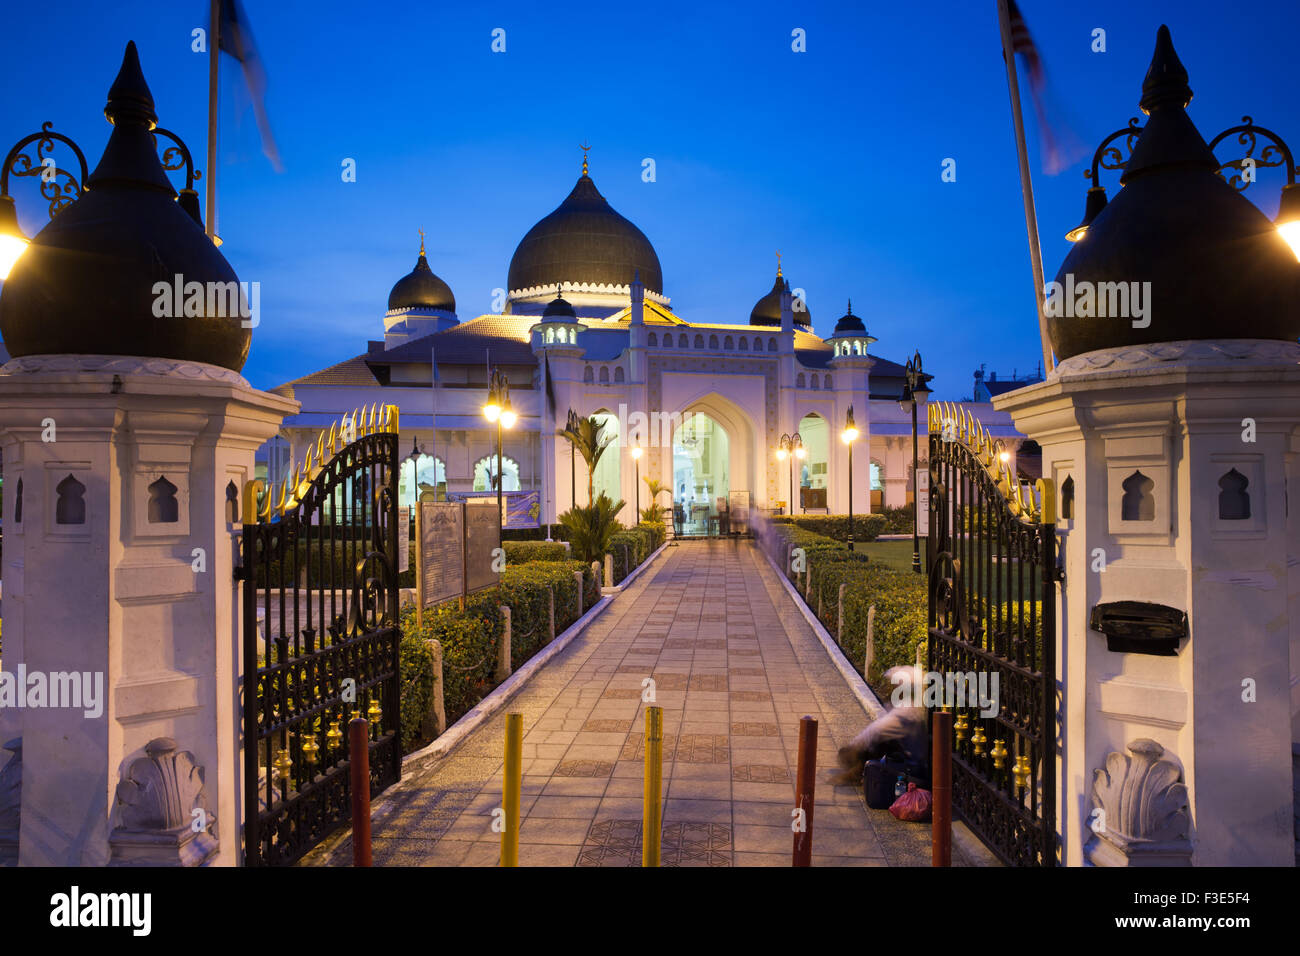 Georgetown, Malaysia — 04 August, 2014: The view of Kapitan Keling Mosque after sunset in Georgetown, Penang, Malaysia on 04 Aug Stock Photo